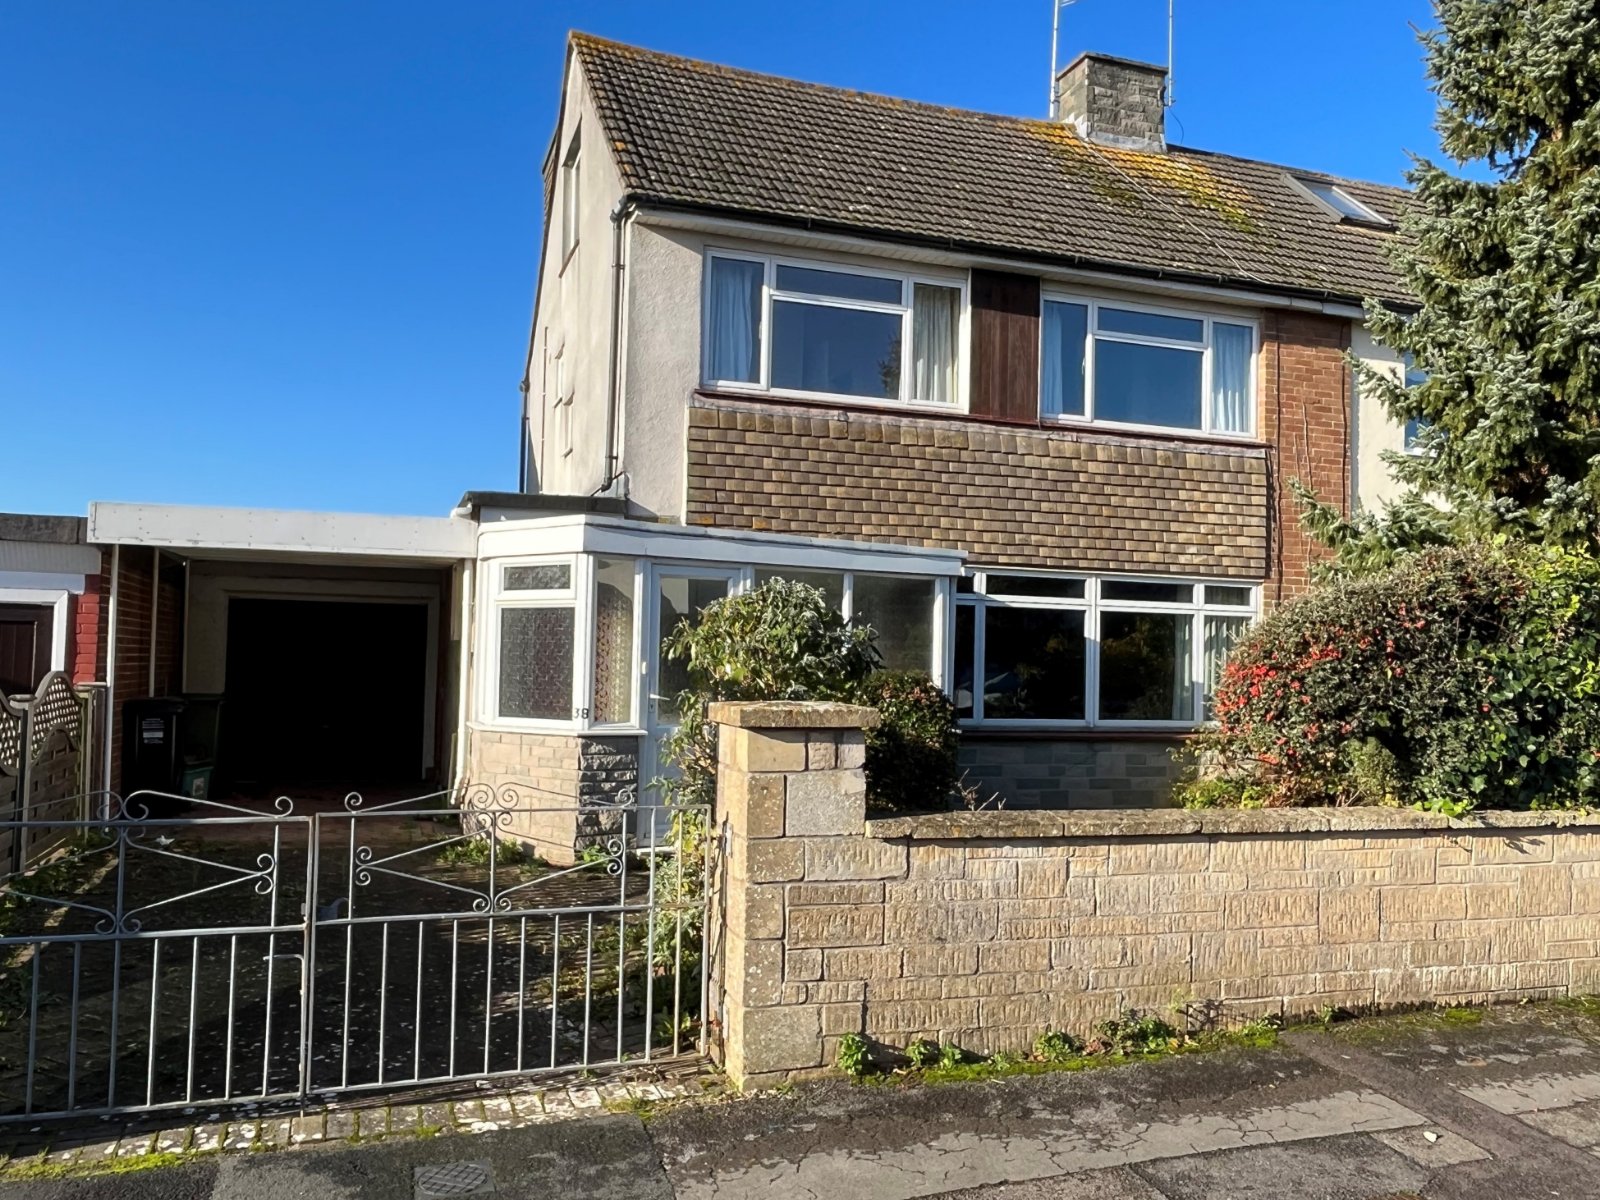 Hillcrest Road, Nailsea, North Somerset, BS48